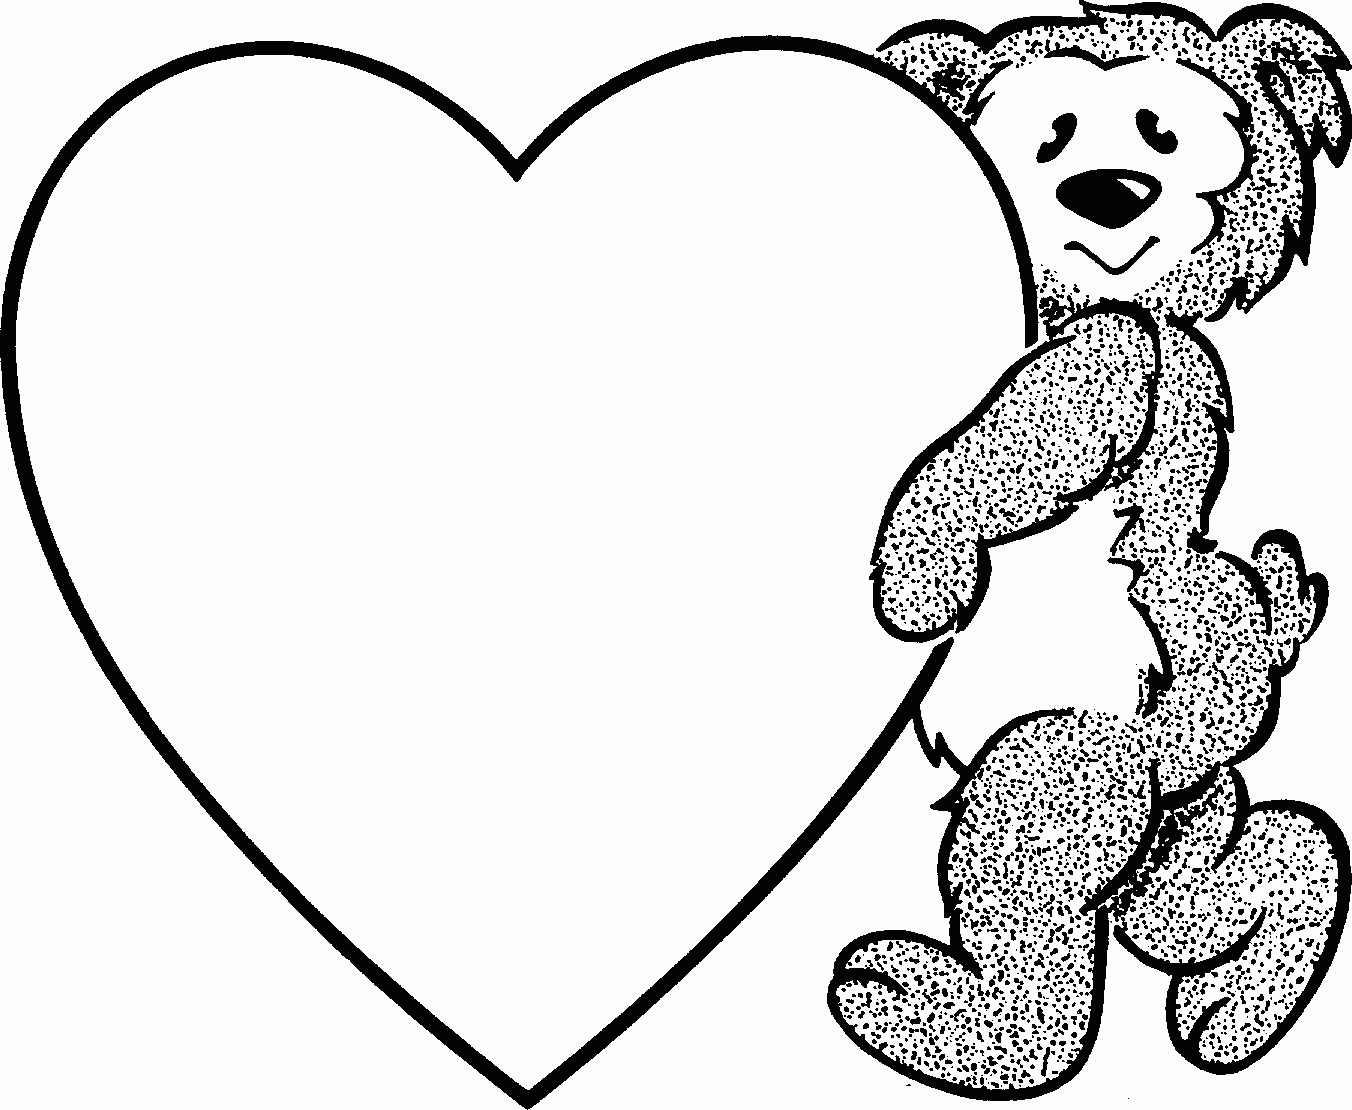 Free Printable Valentine Coloring Pages For Kids | Decorations - Free Printable Valentine Coloring Pages